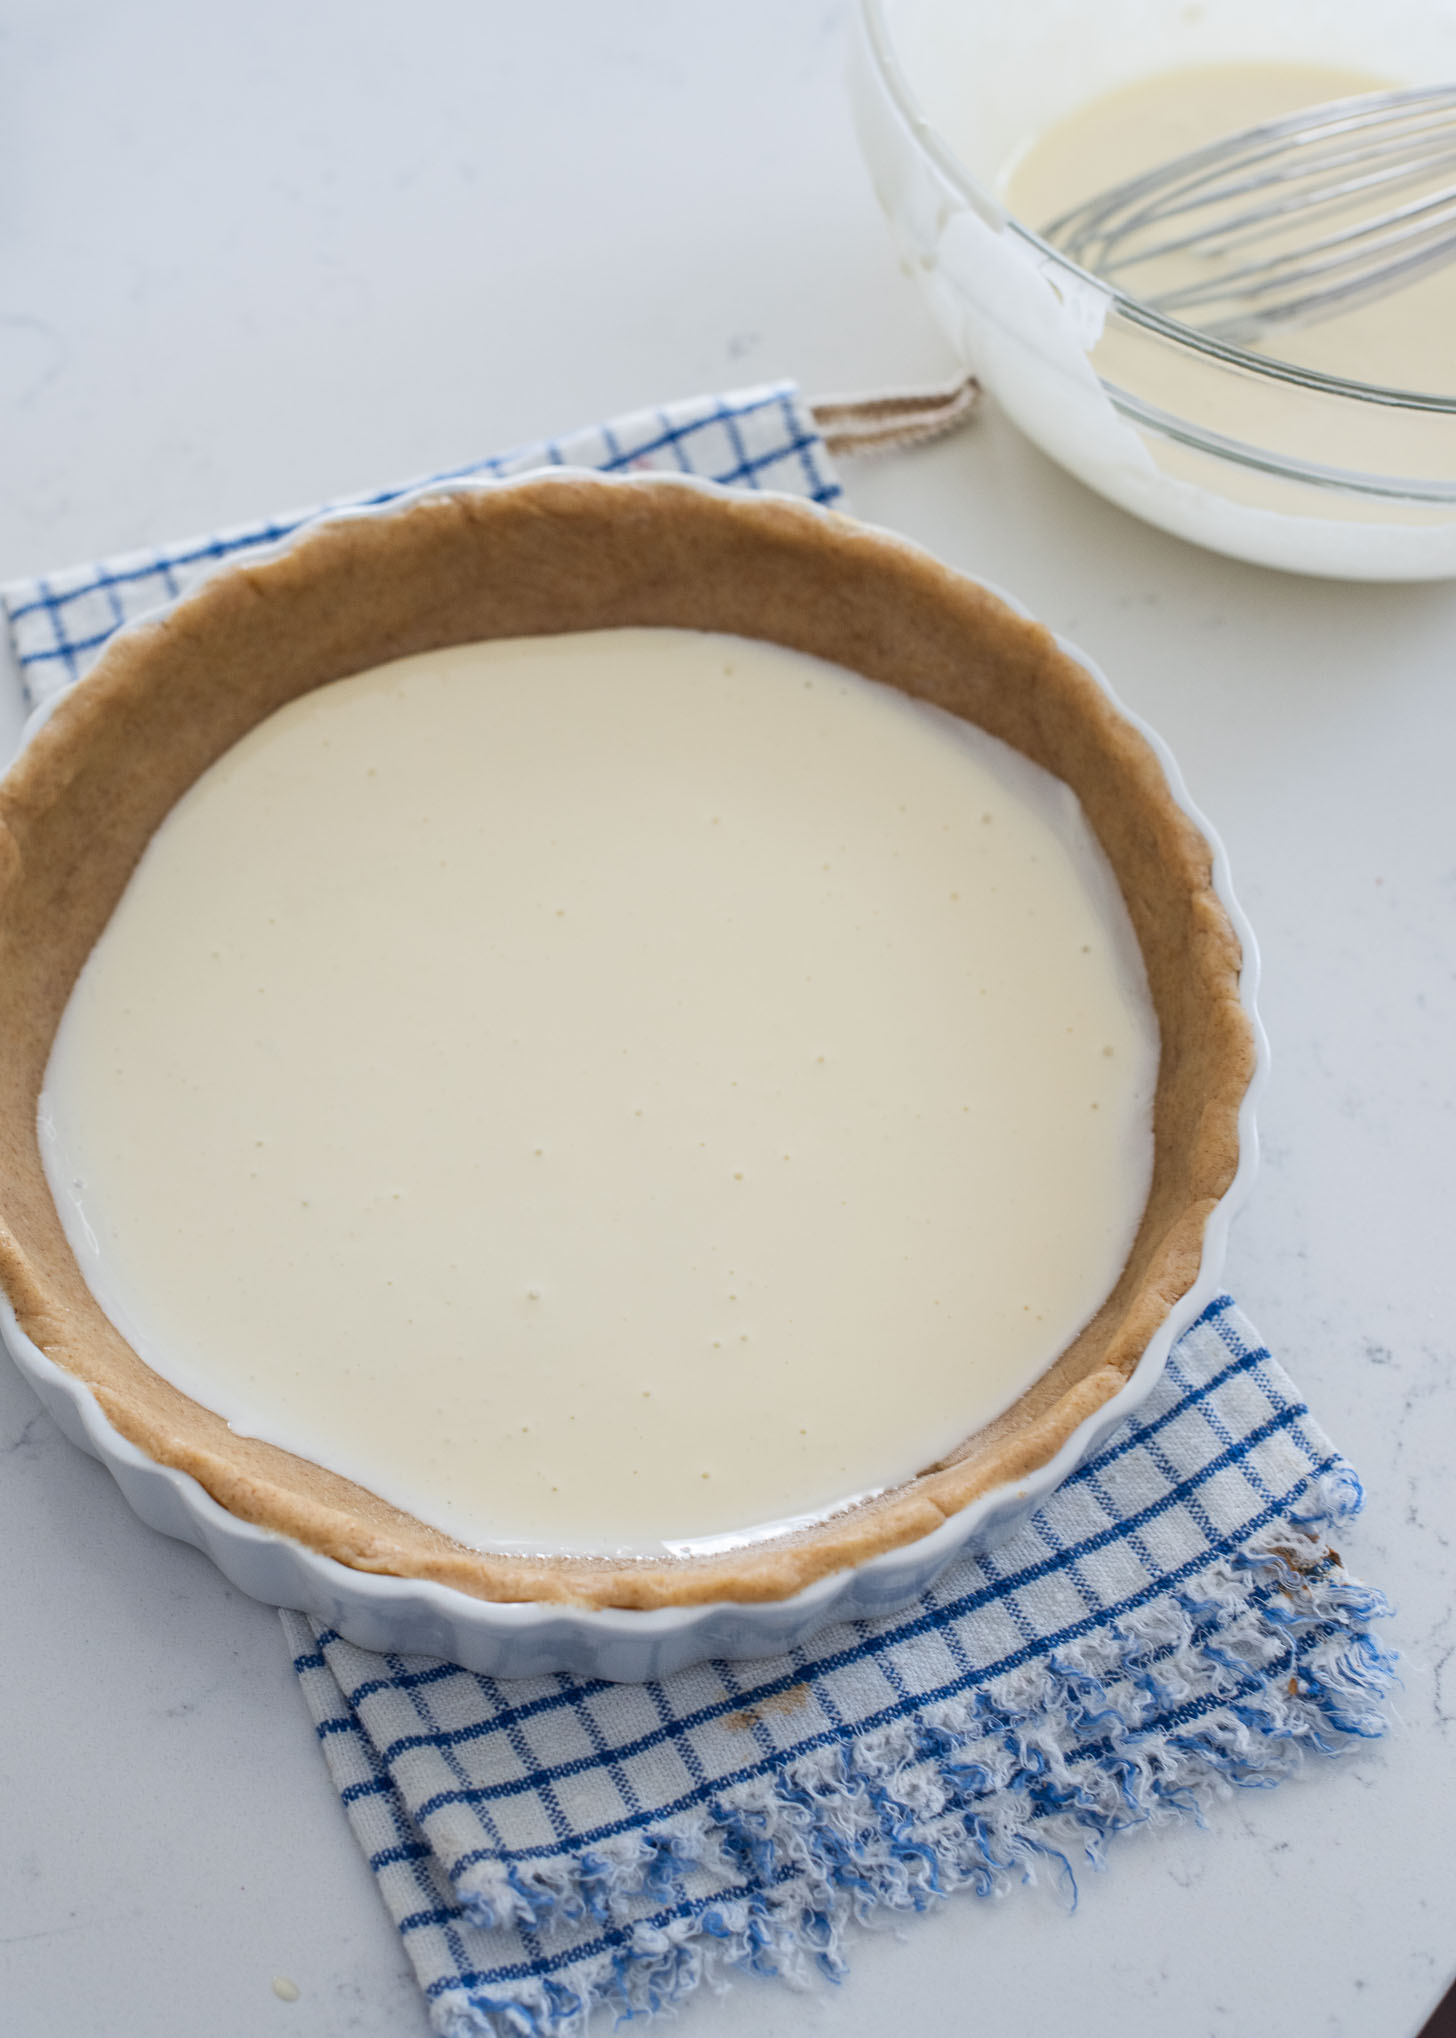 Half of cream filling is poured on a prepared pie crust in a pan.